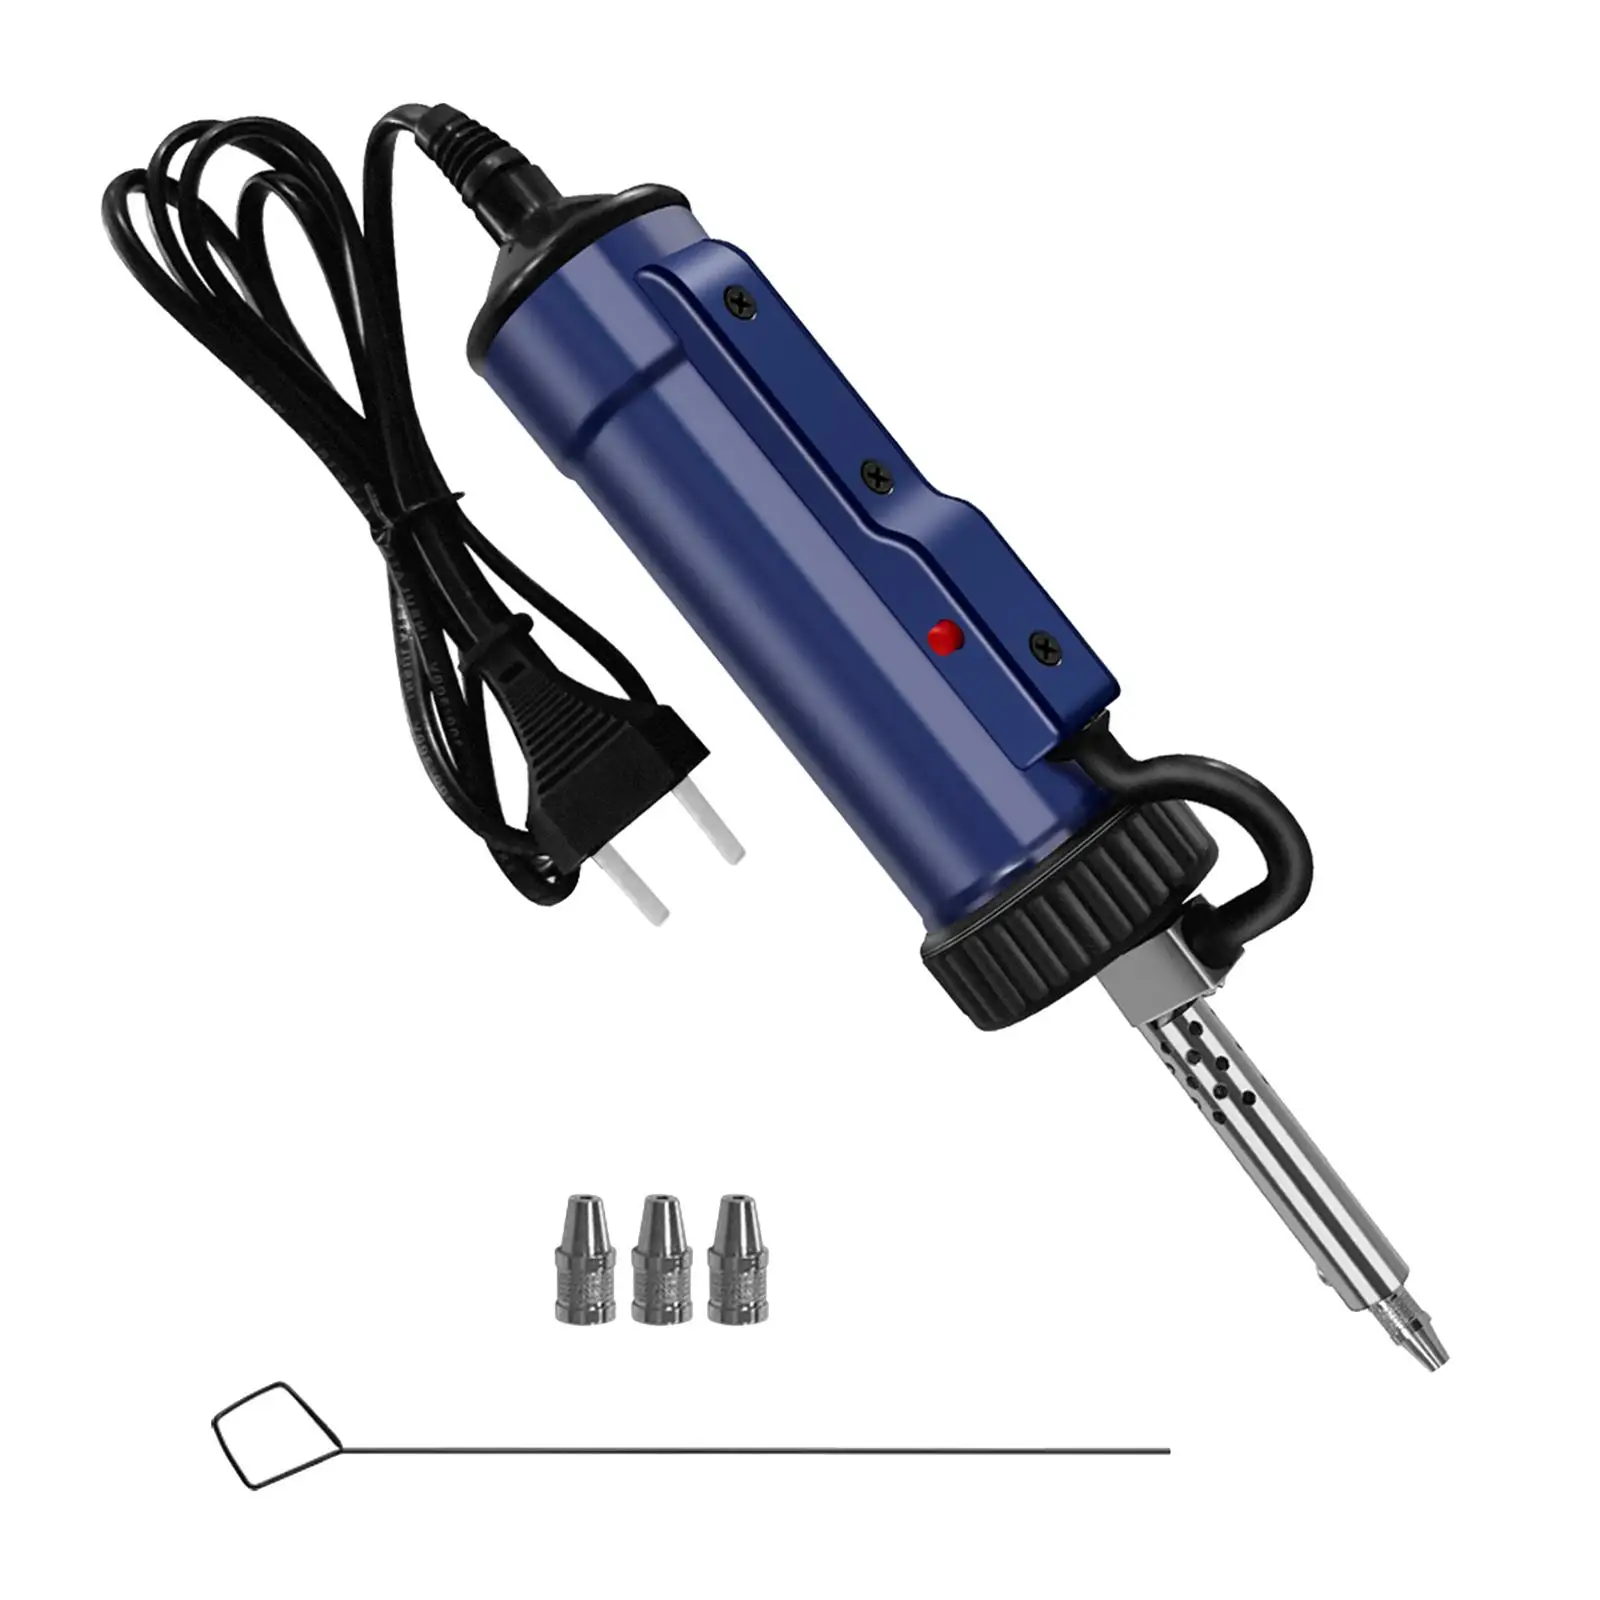 Electric Solder Tin suckers Electric Soldering Handheld Solder Removal Tool Automatic Vacuum Solder suckers for Appliance Repair